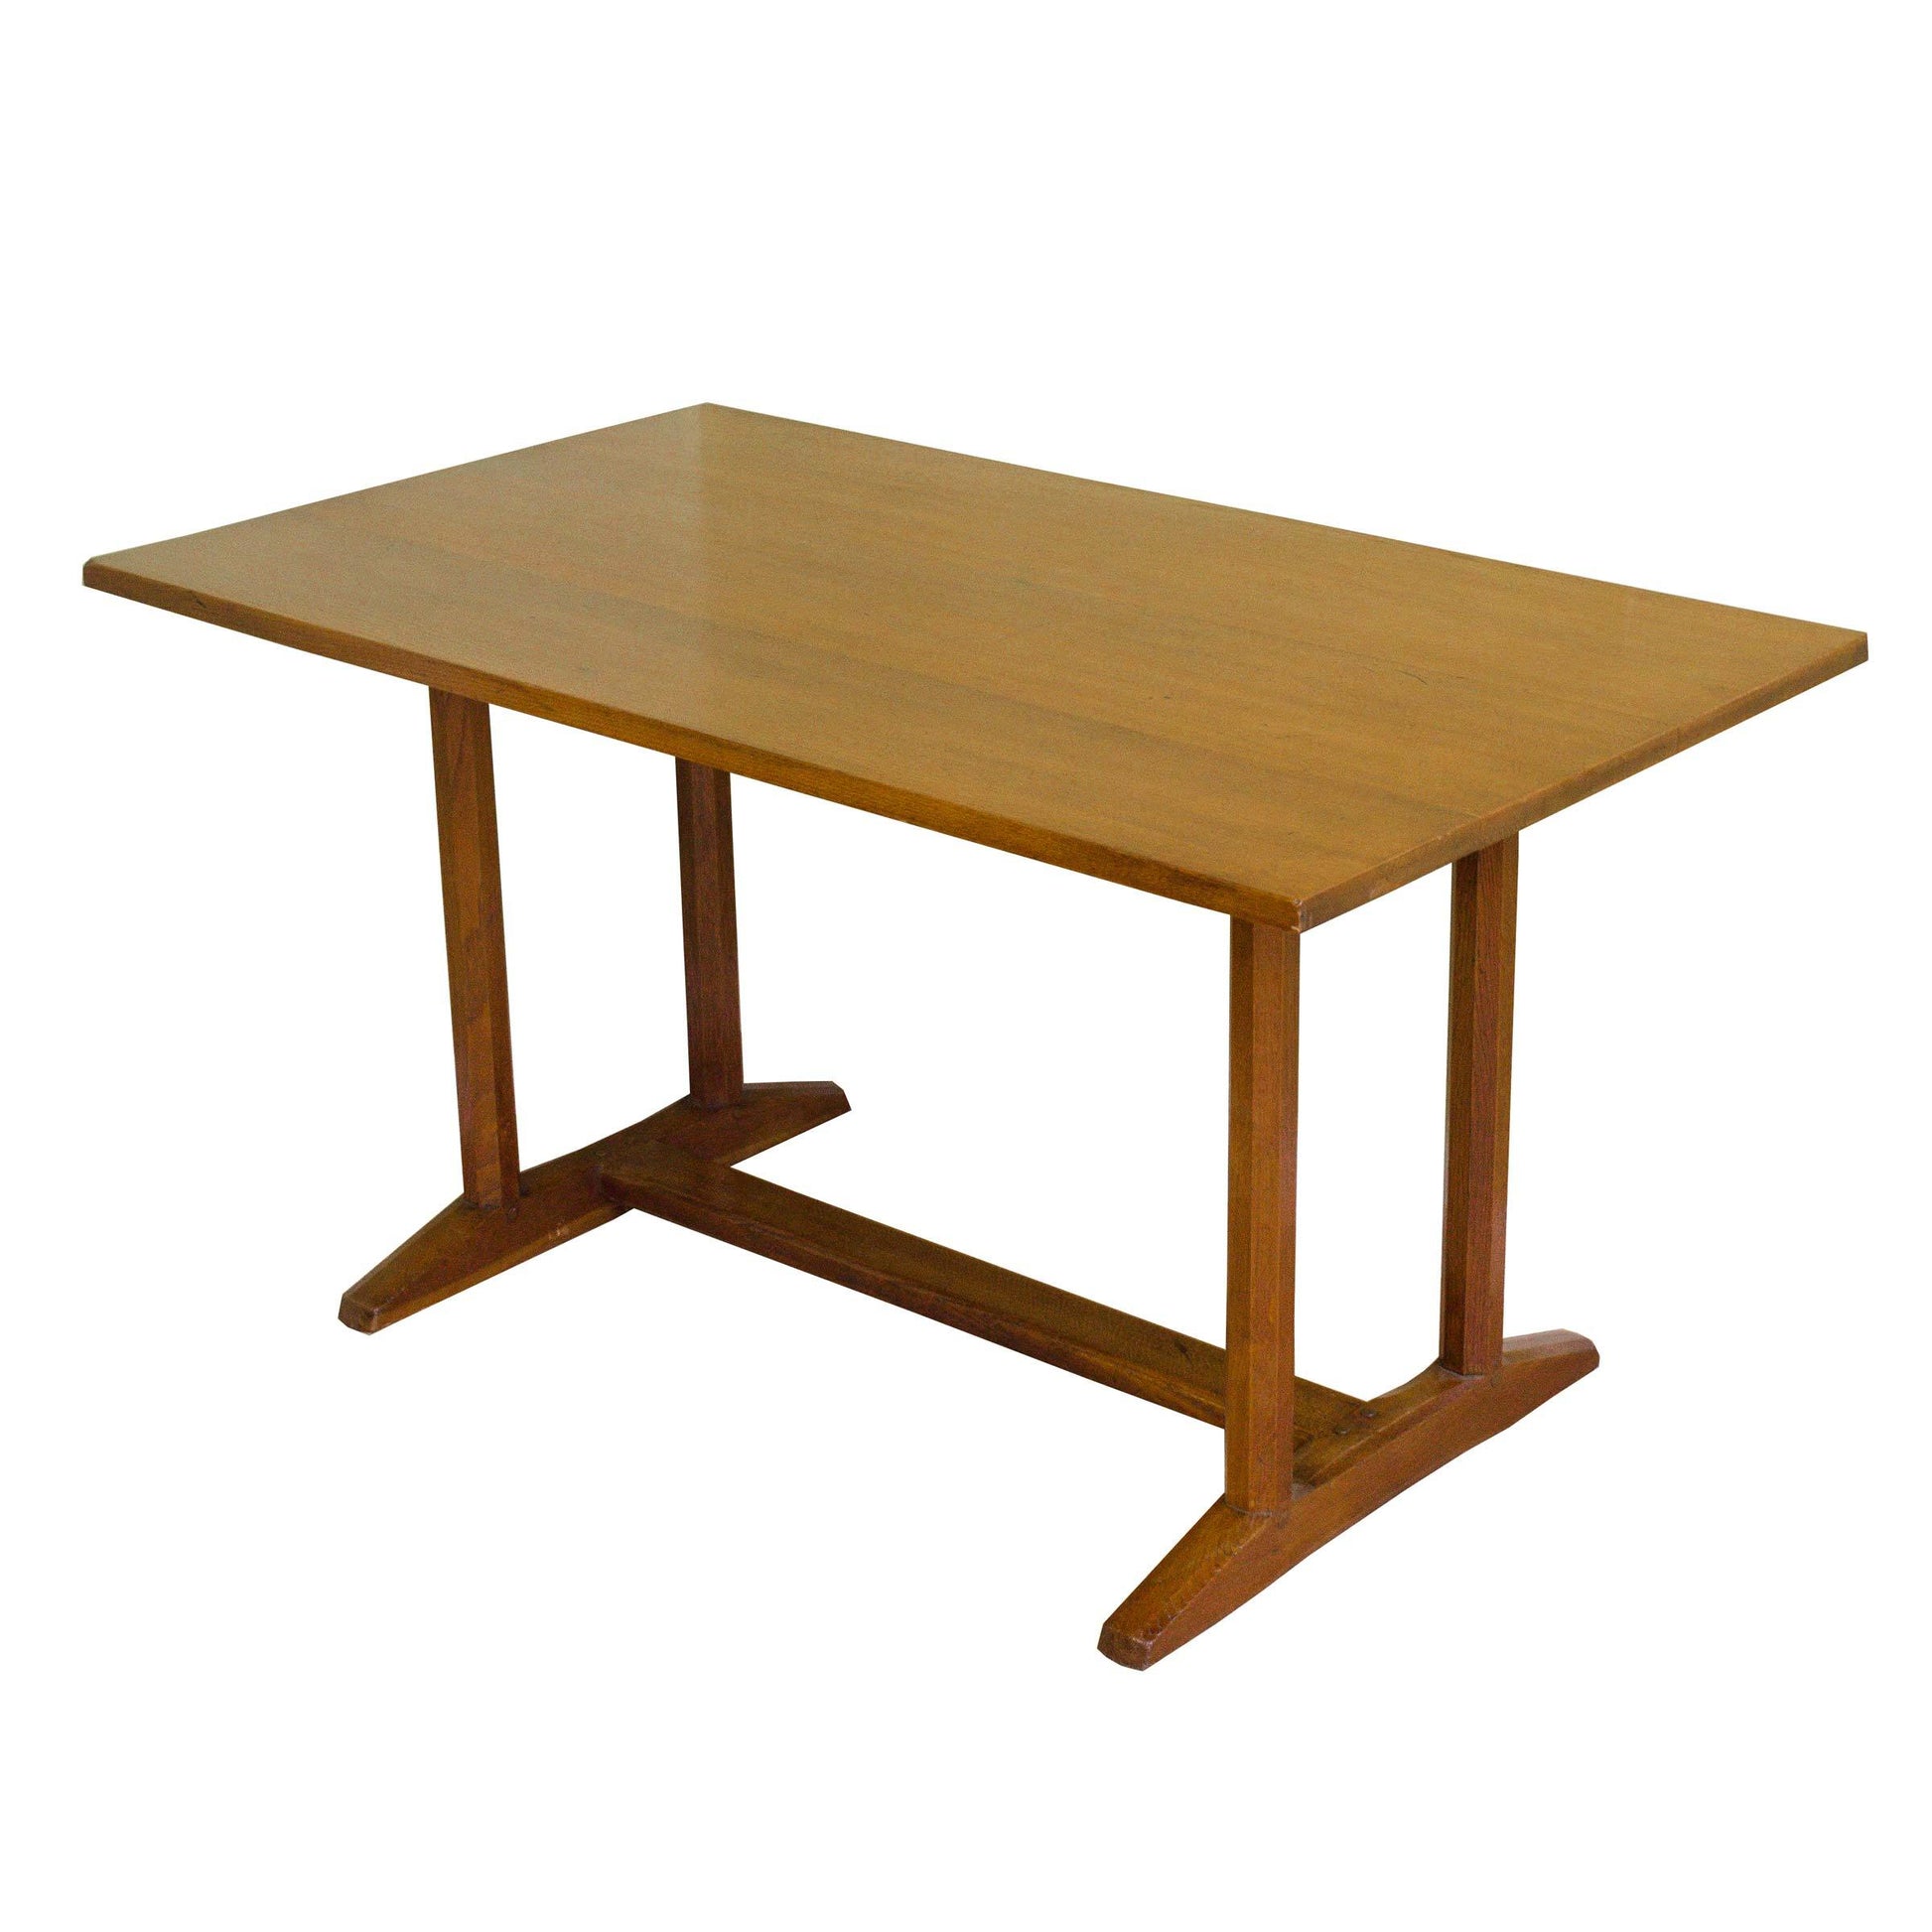 Gordon Russell Arts and Crafts Cotswold School English Oak Dining Table 1927